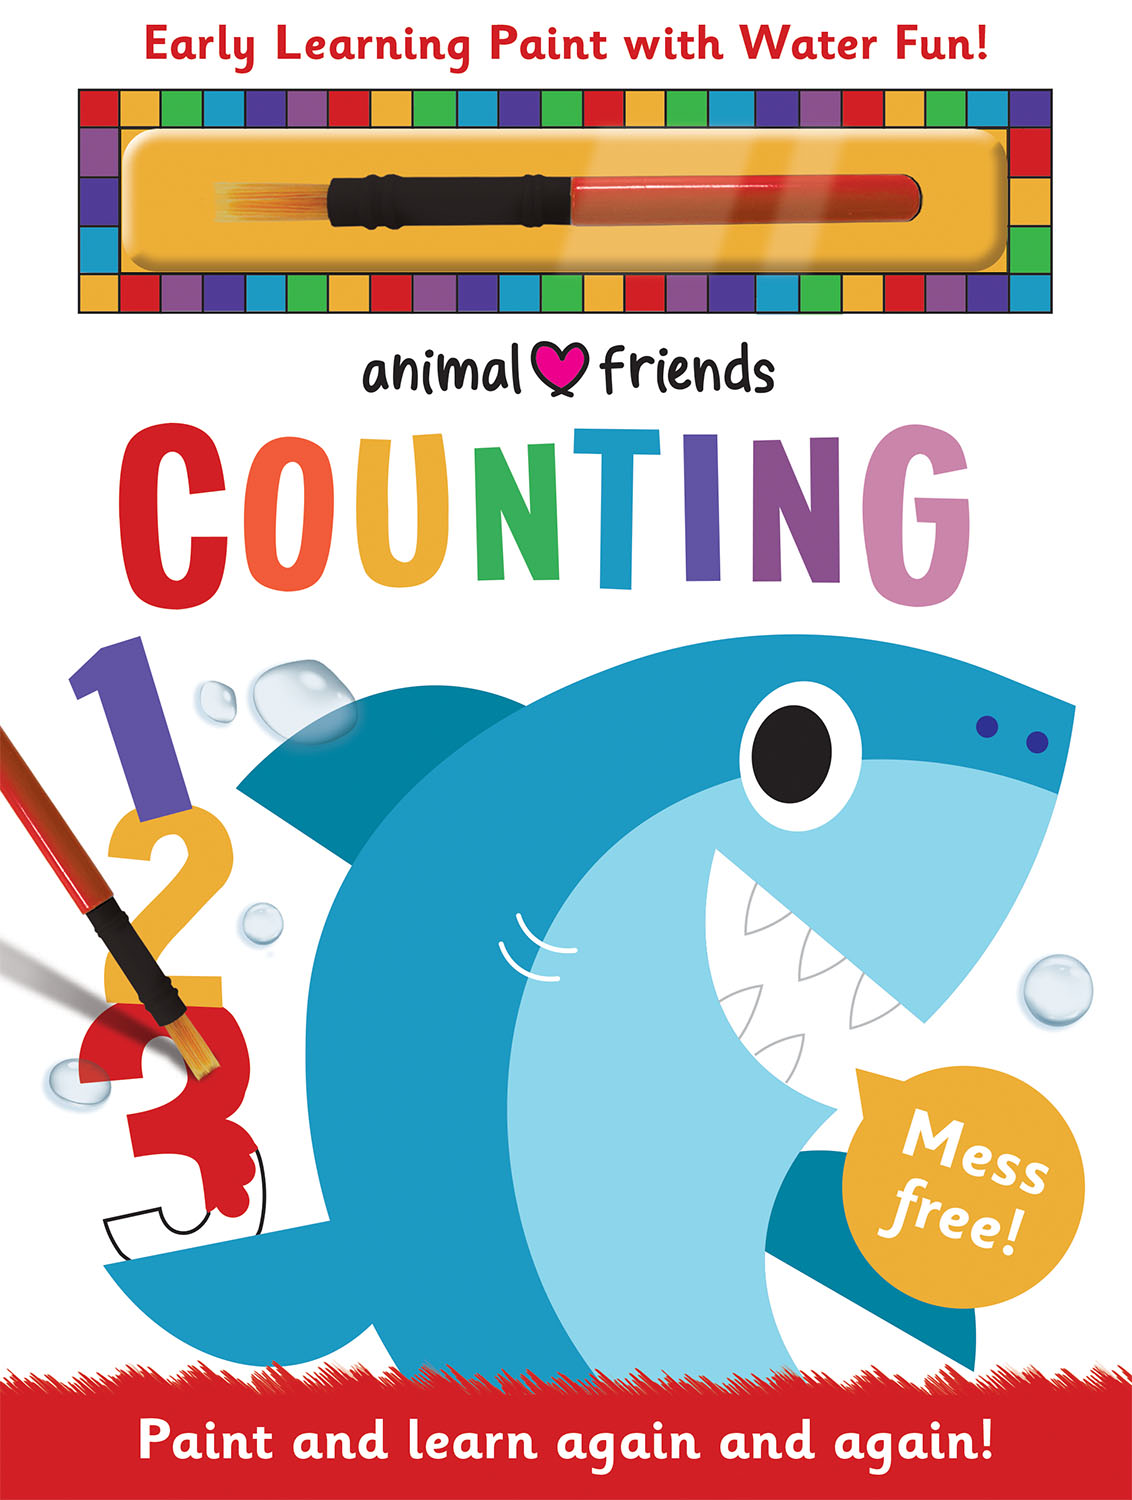 ANIMAL FRIENDS COUNTING